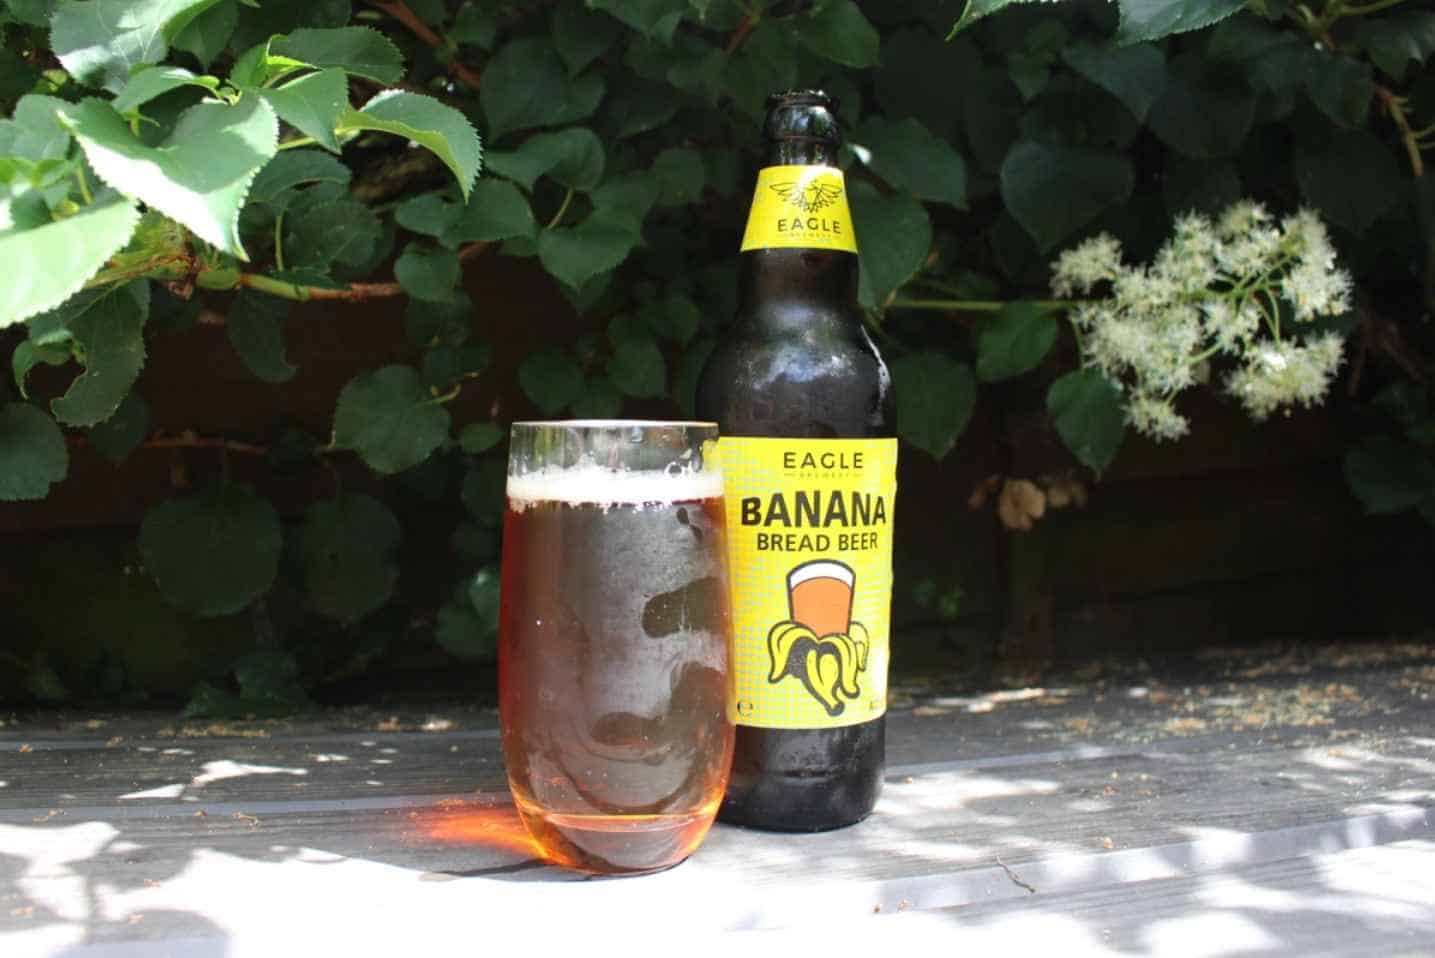 Banana Bread Beer by Eagle Brewery